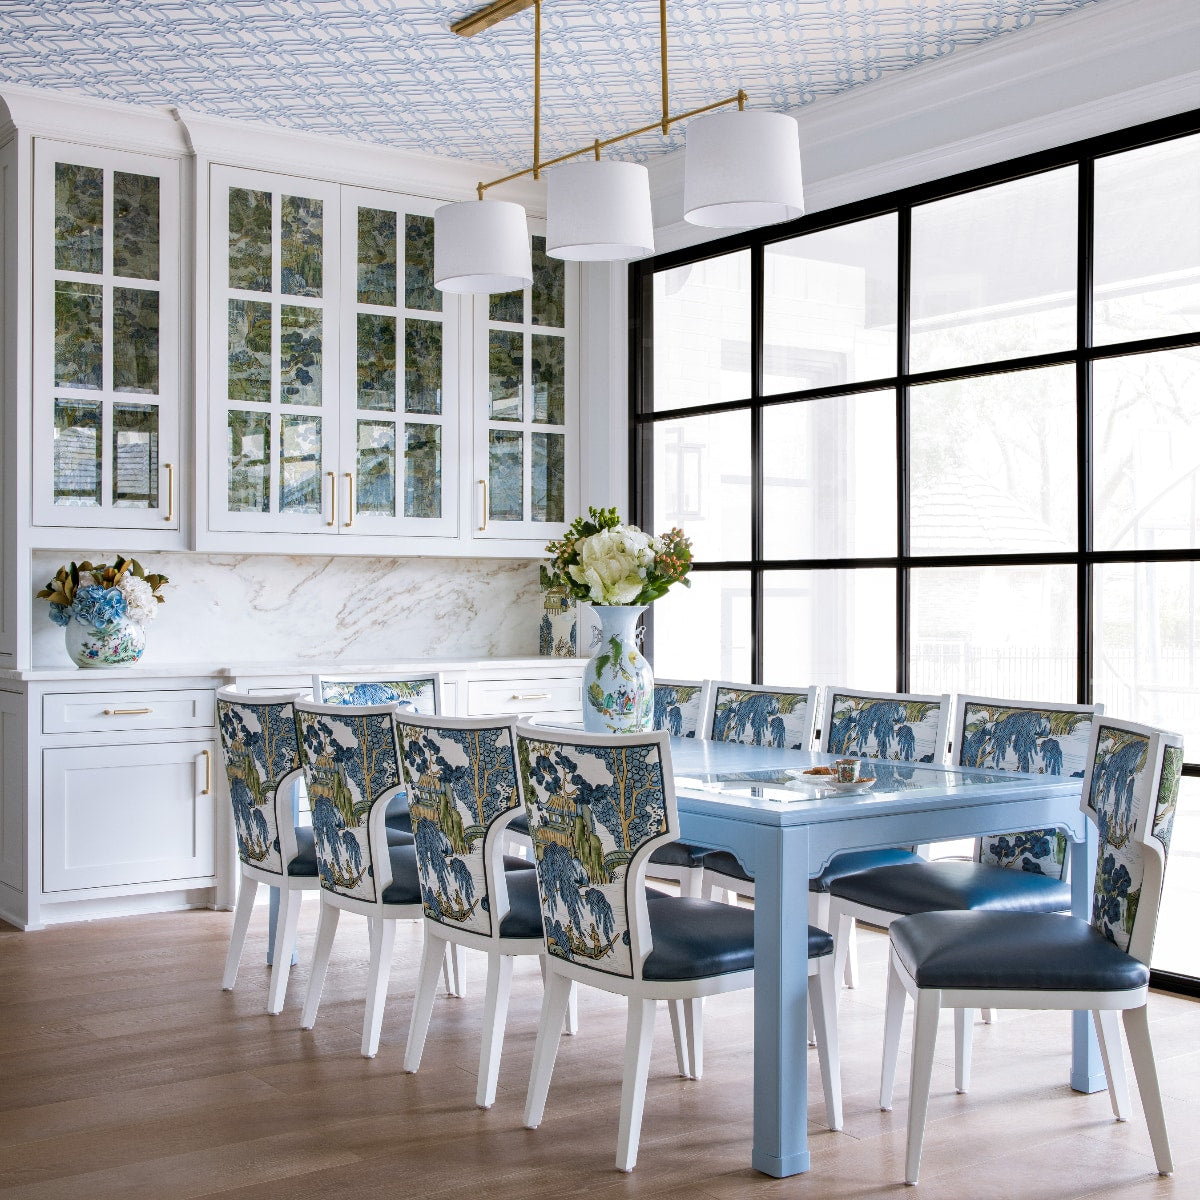 Dining area with blue table and painted back dining chairs